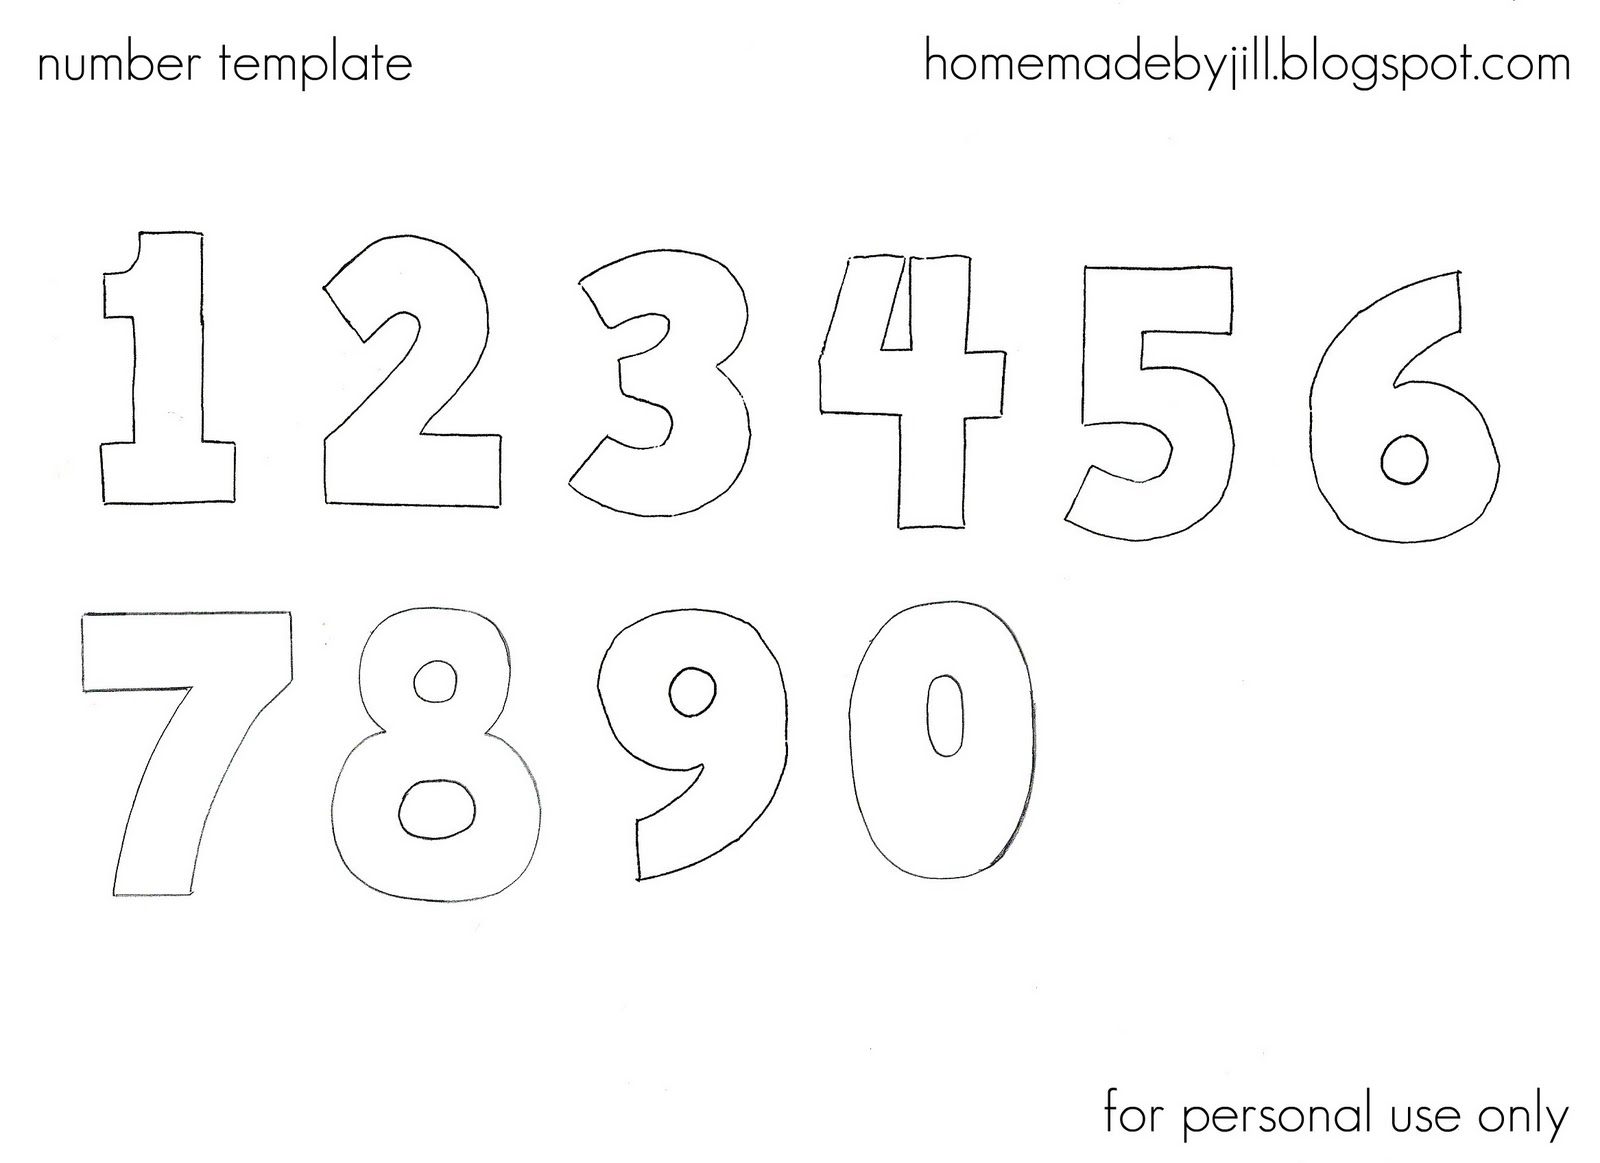 Printable Number Templates | hauck mansion